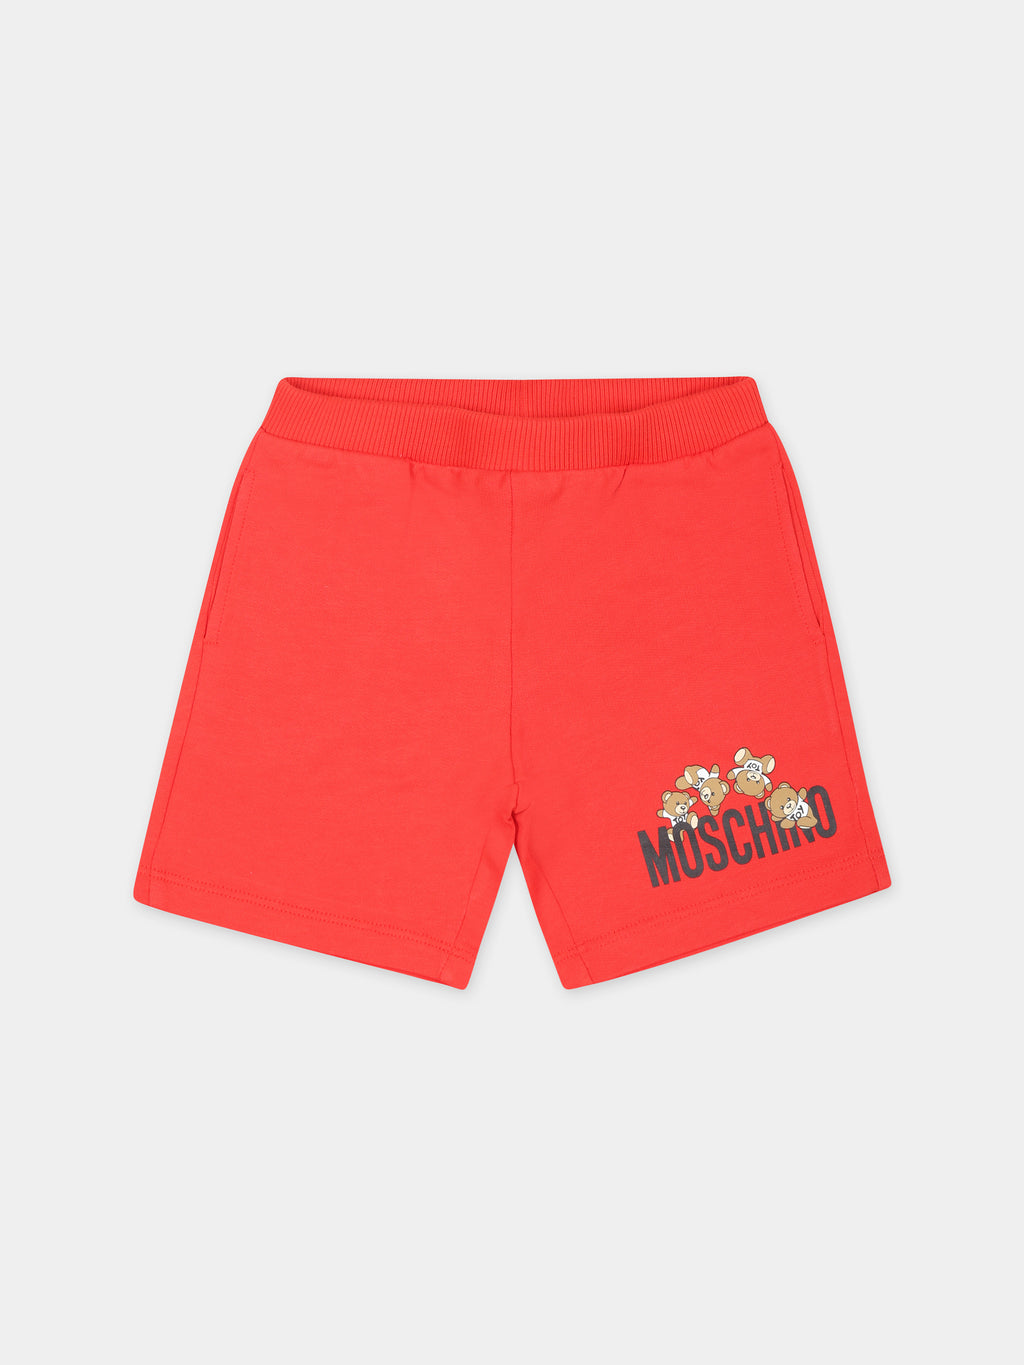 Red shorts for baby boy with Teddy Bears and logo